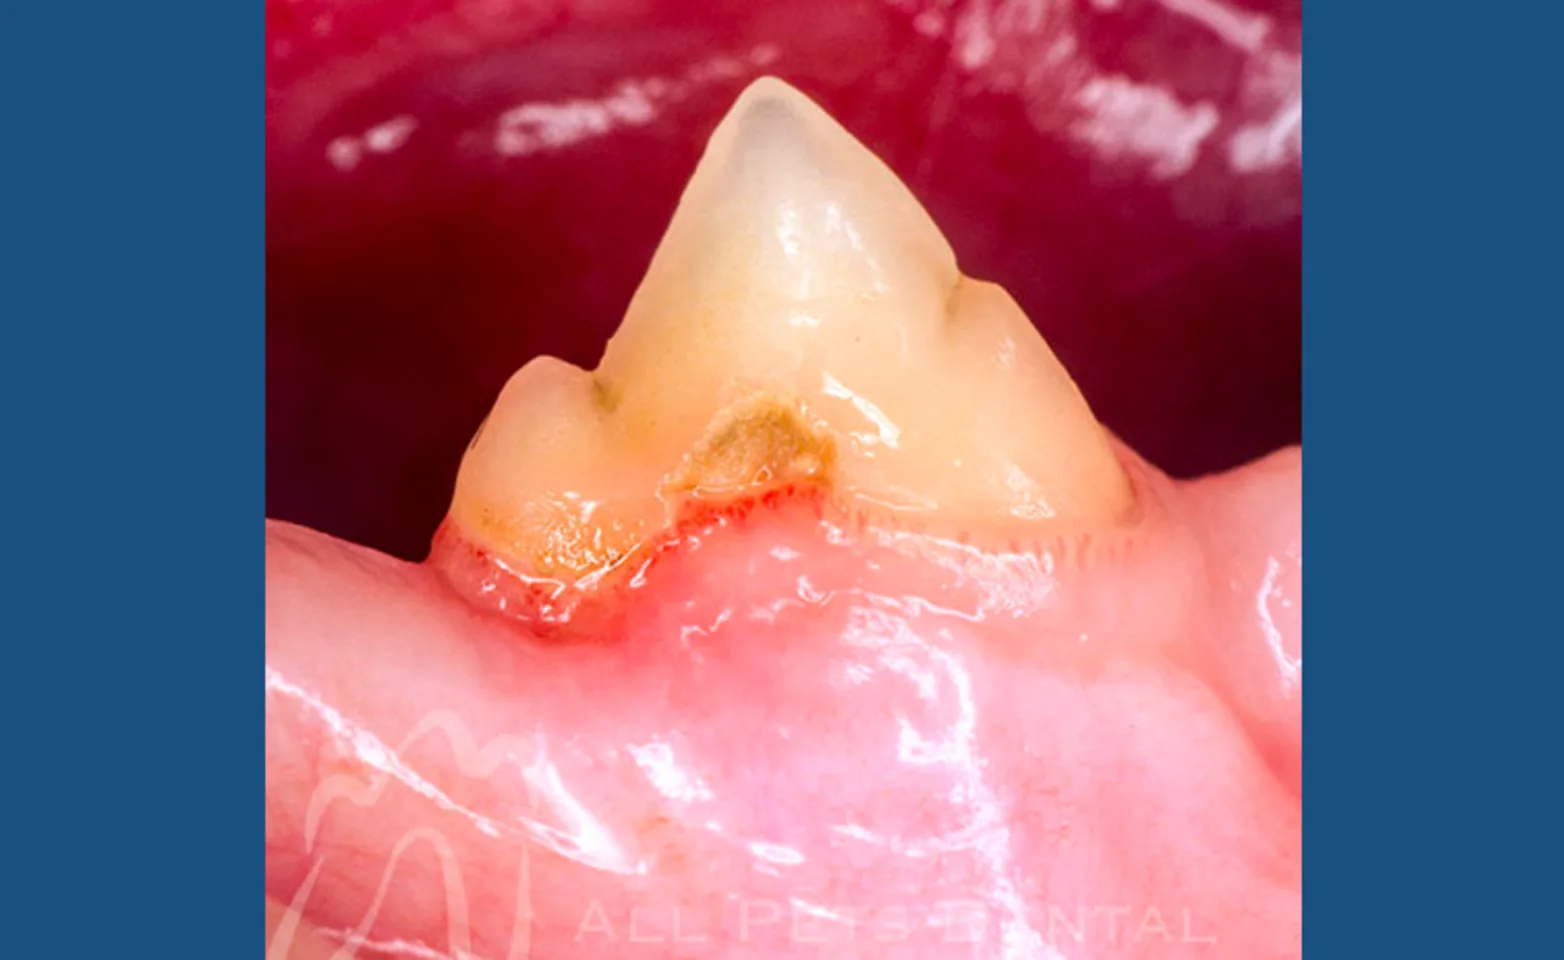 Stage 2 Tooth Resorption